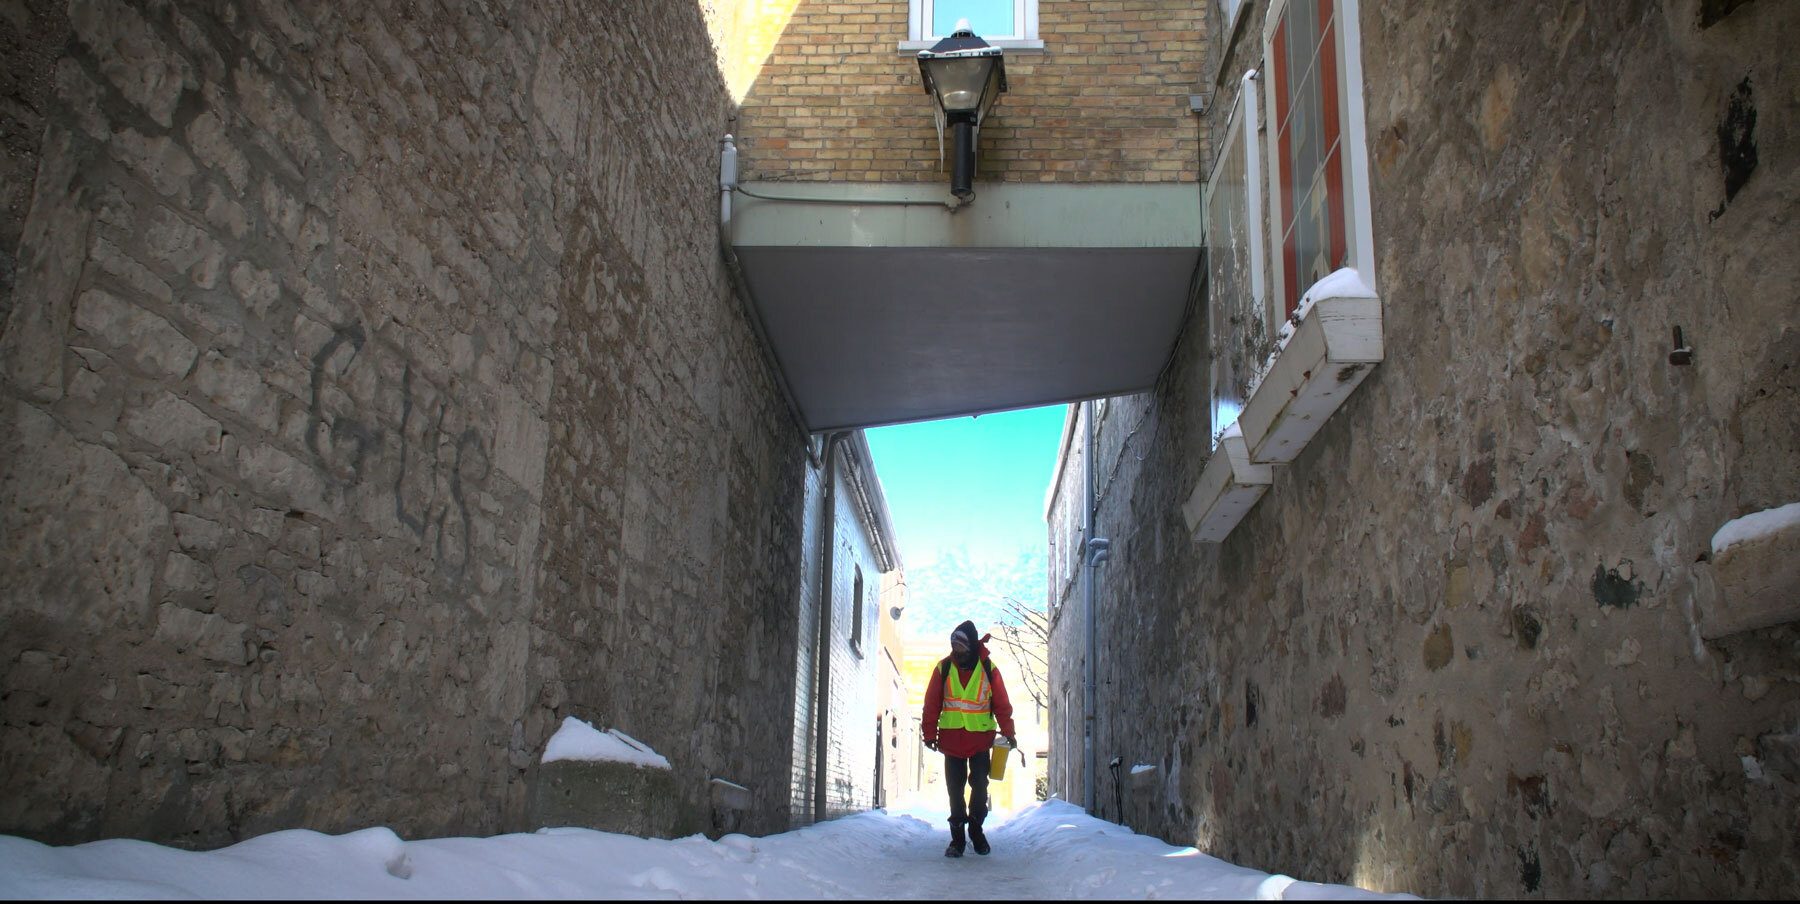 image of a person walking down an alley